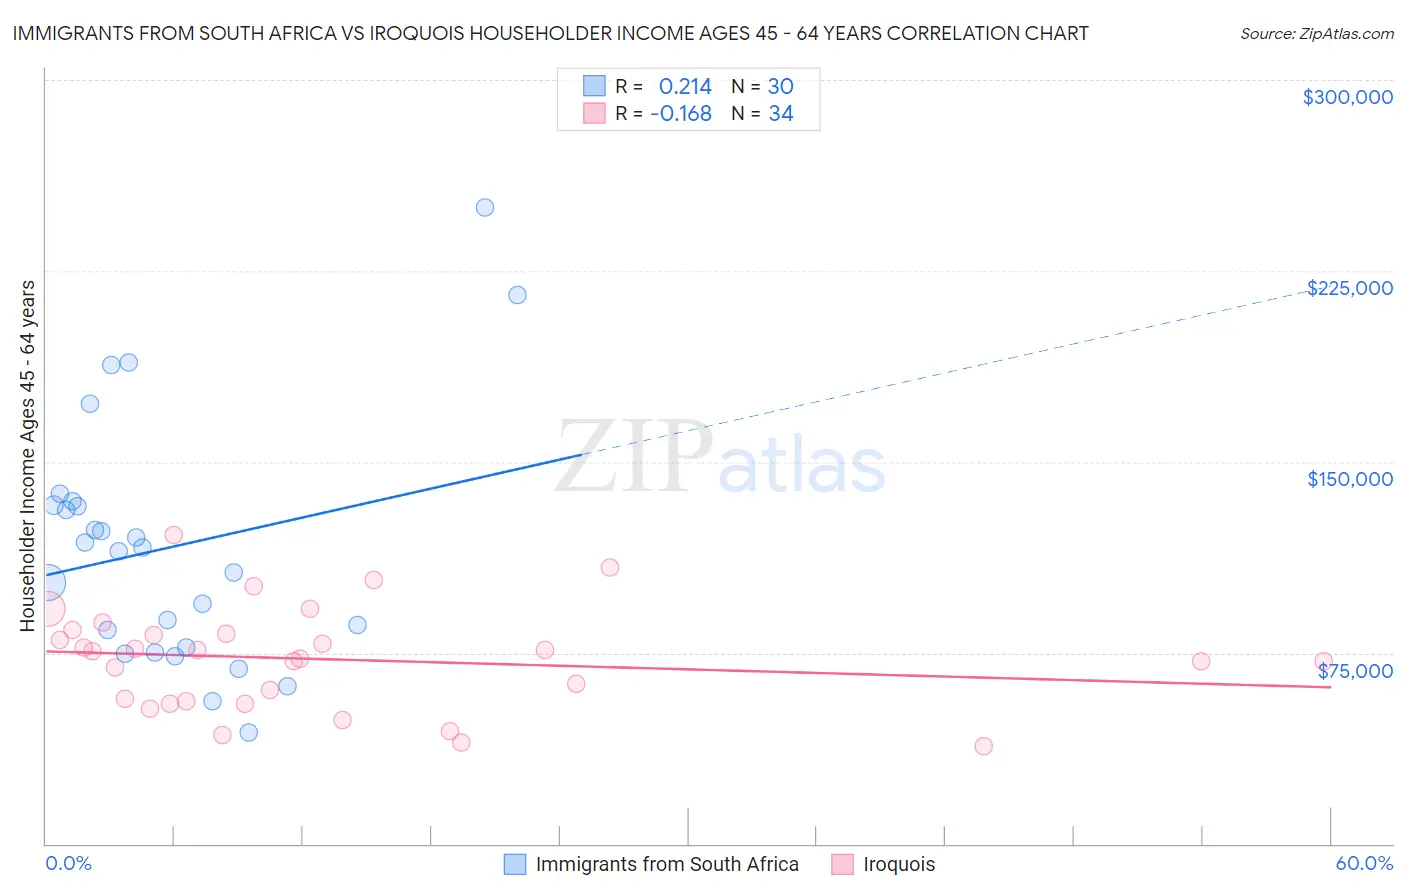 Immigrants from South Africa vs Iroquois Householder Income Ages 45 - 64 years